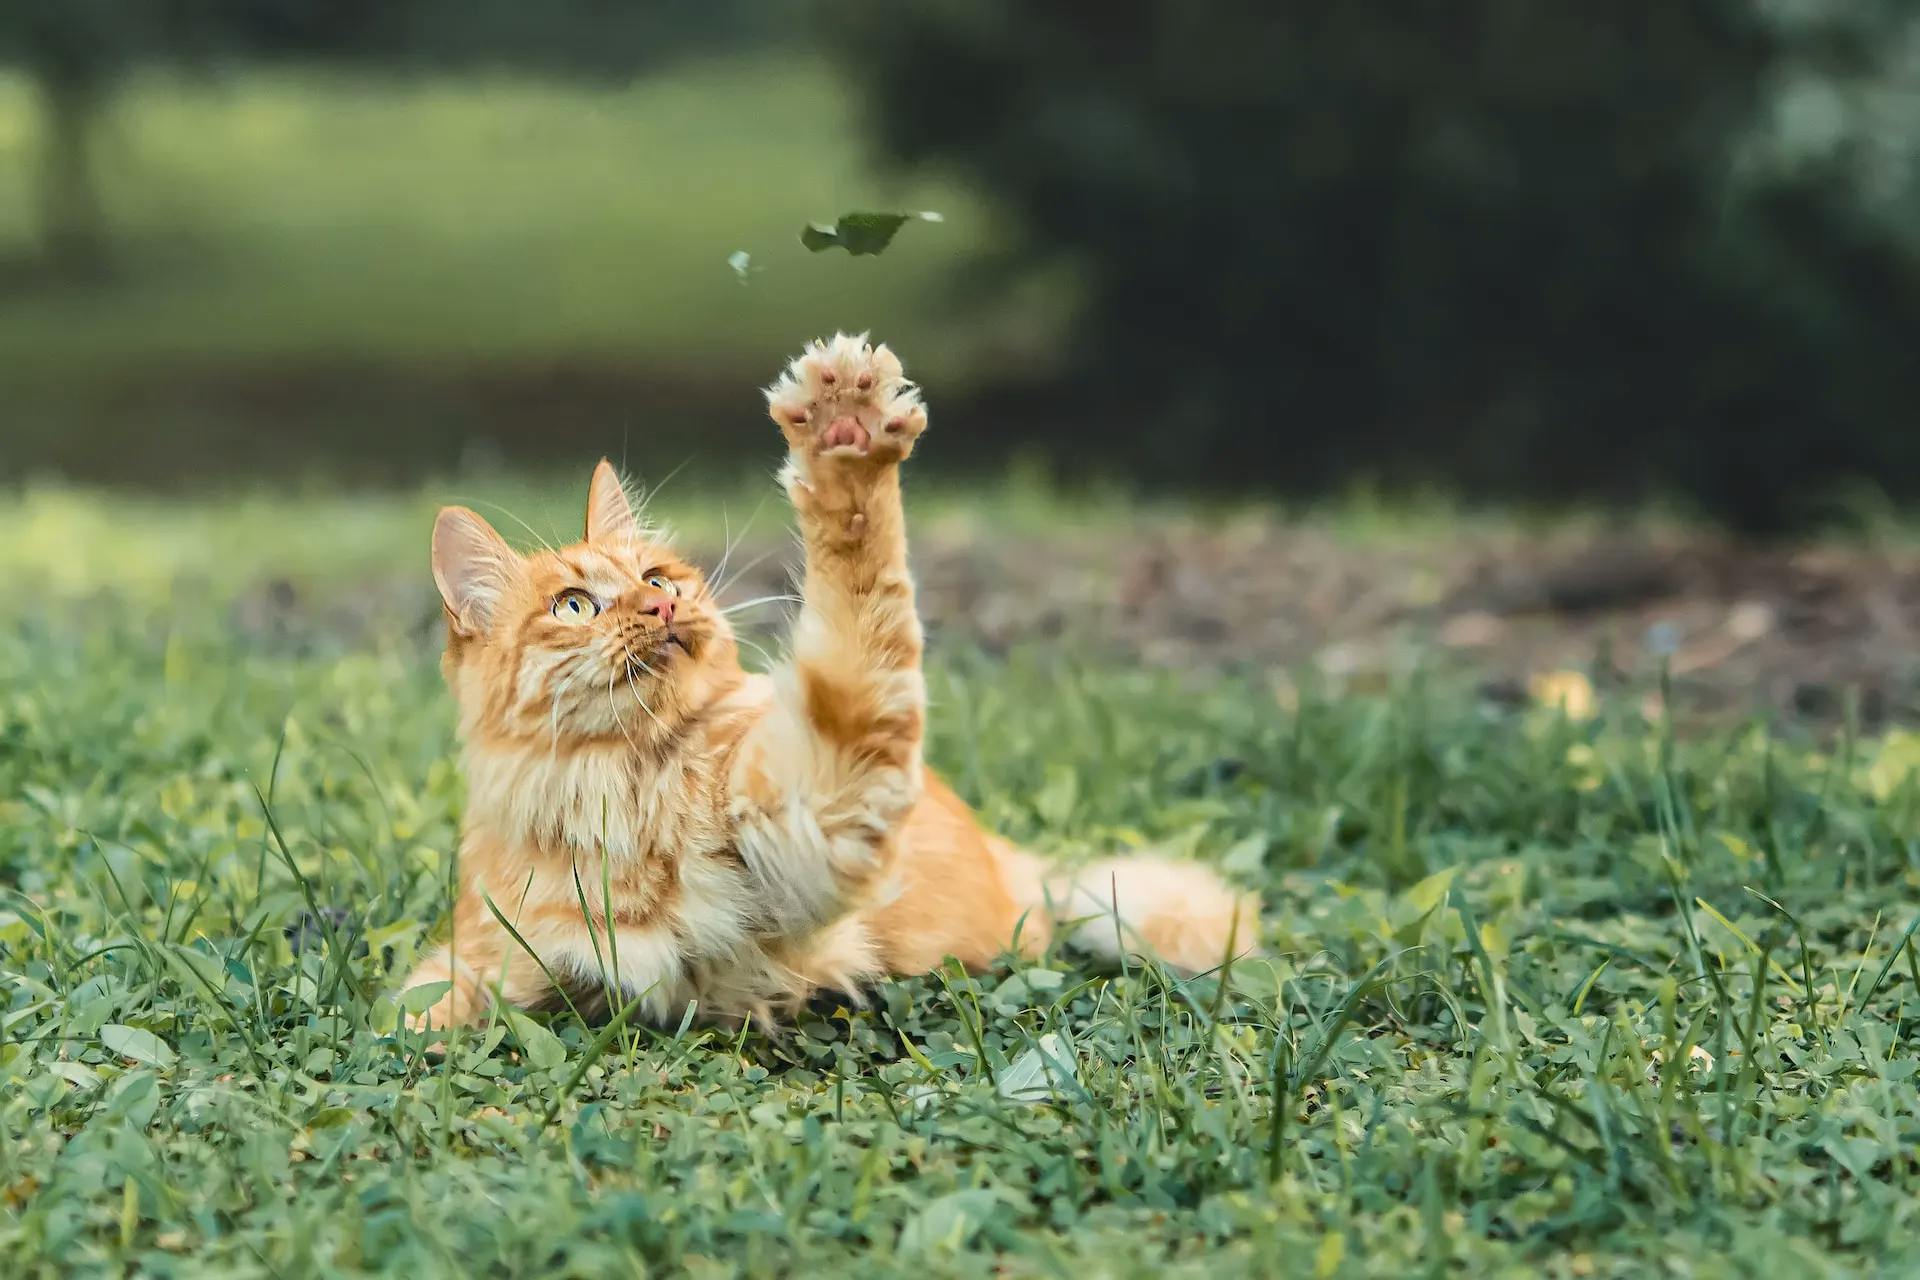 Orange tabby cat playing in the grass